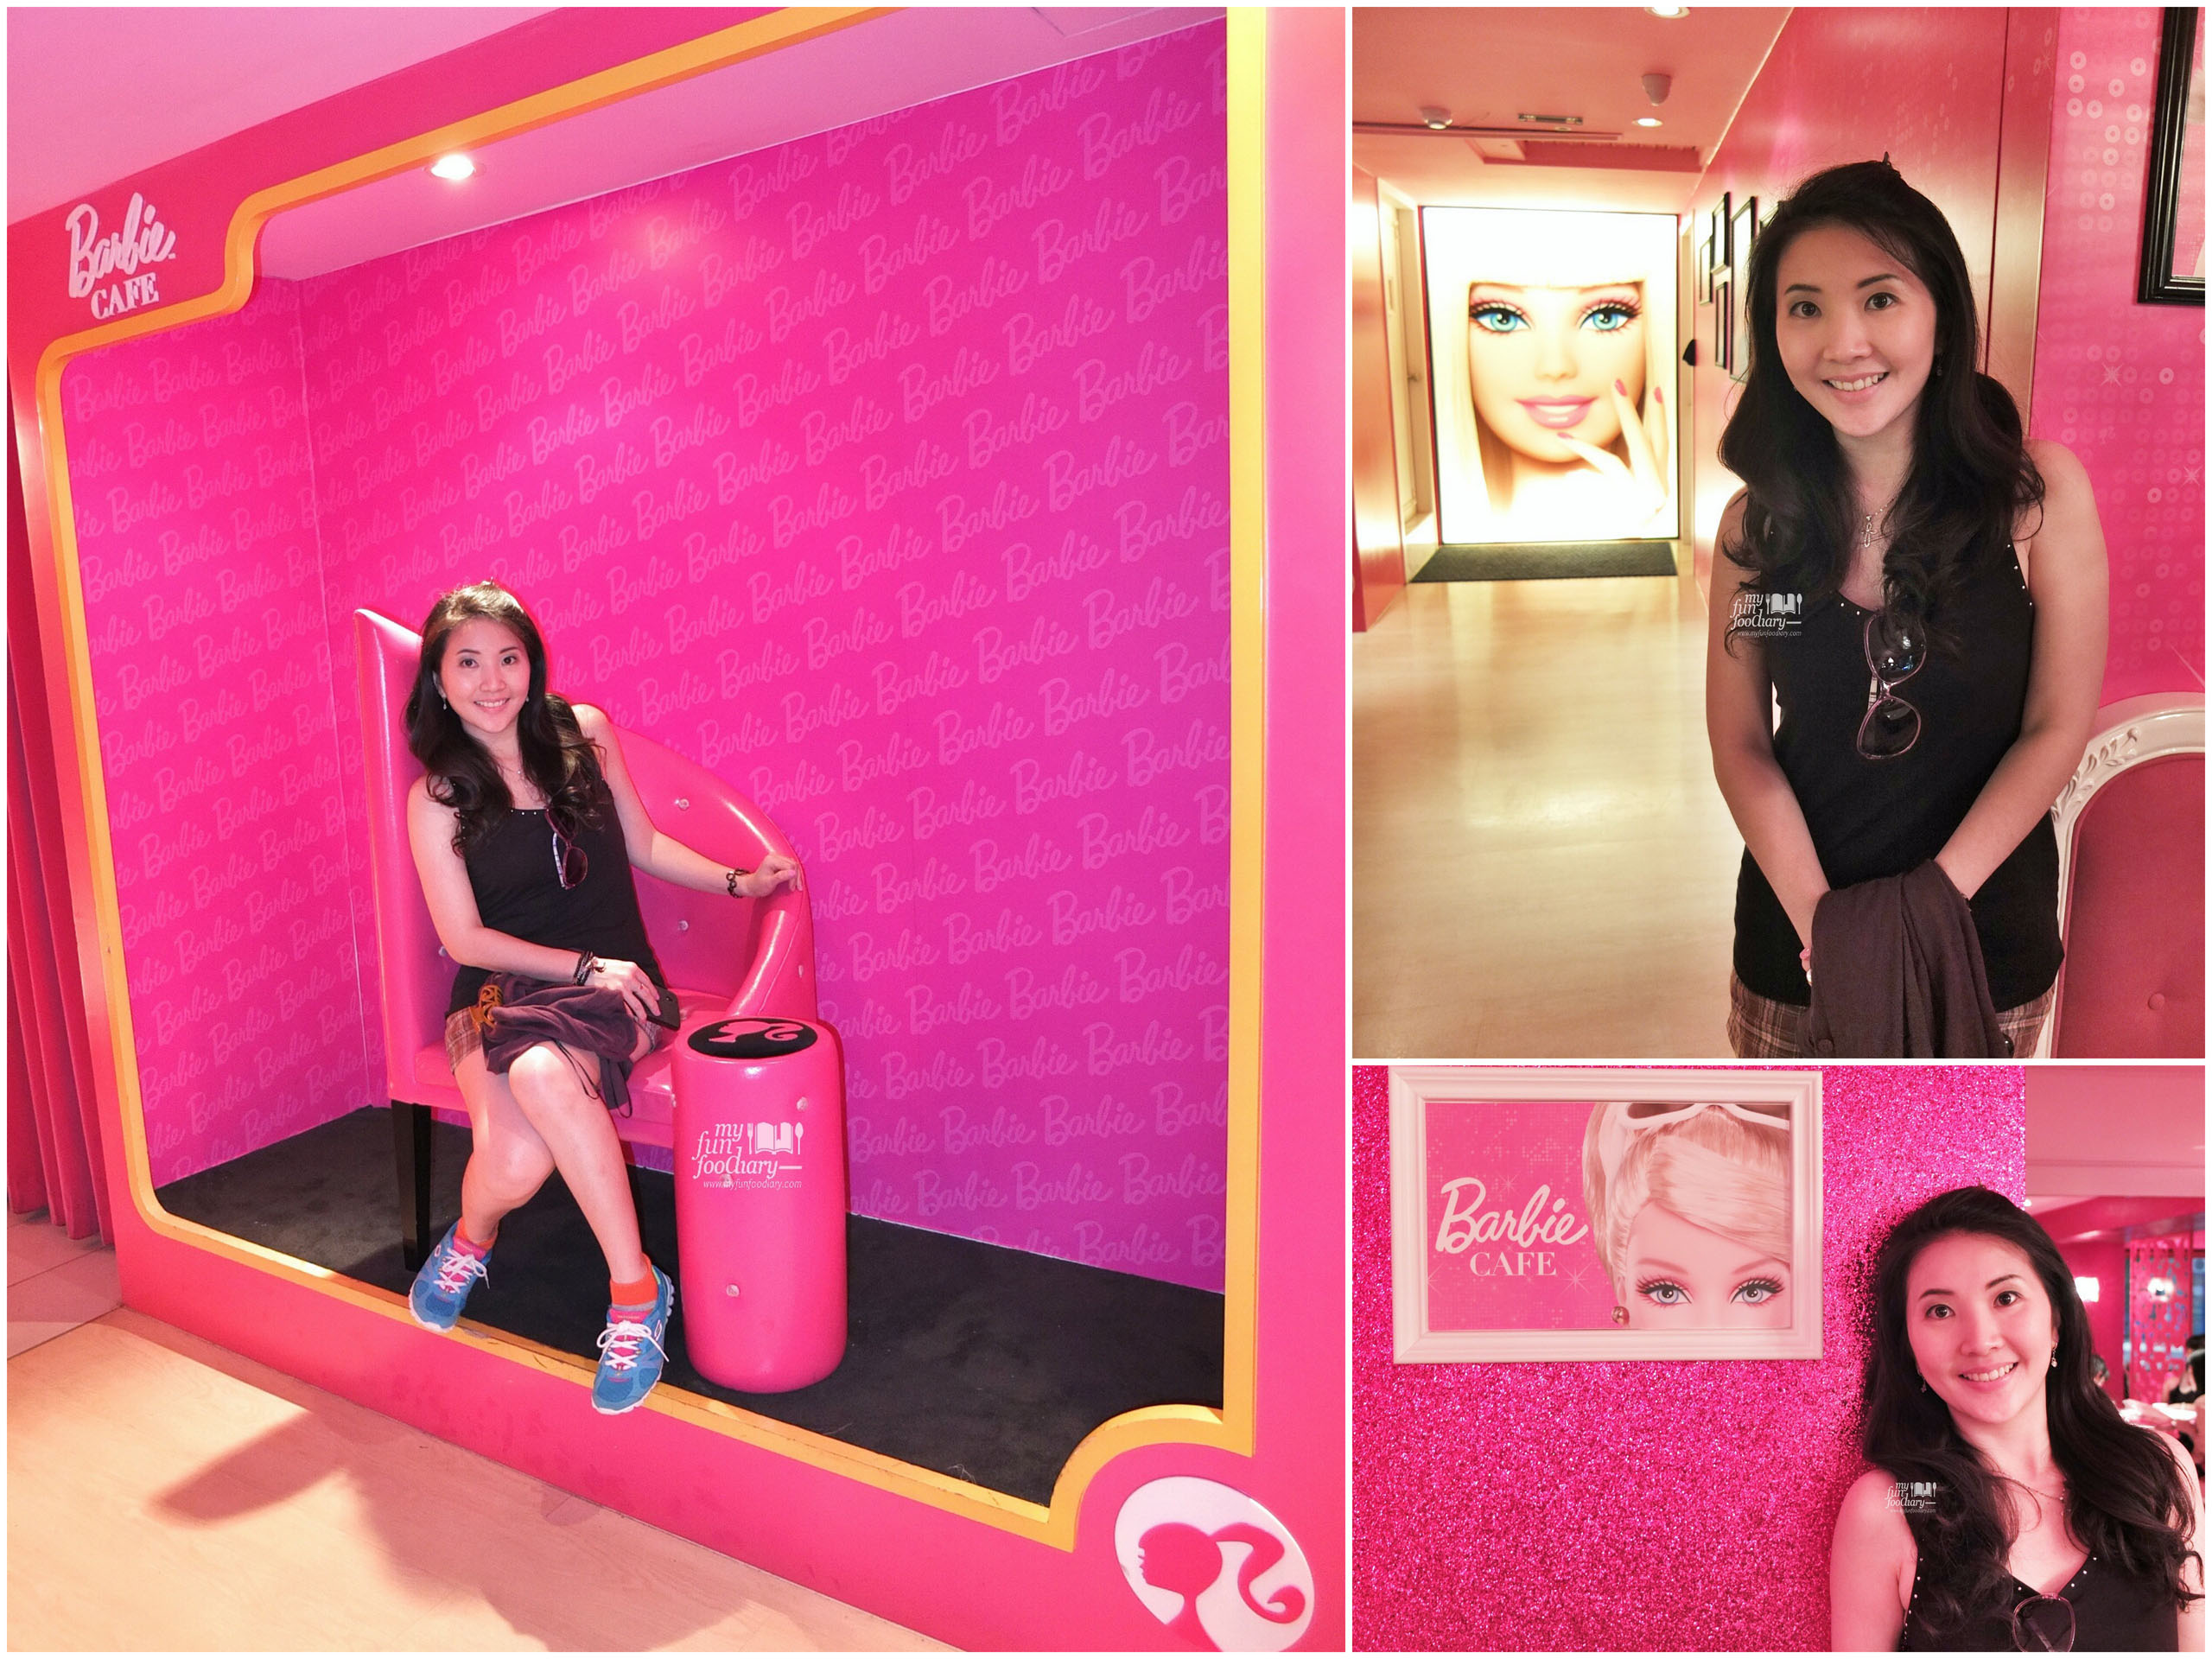 Happy Face of Me at Barbie Cafe Taiwan by Myfunfoodiary